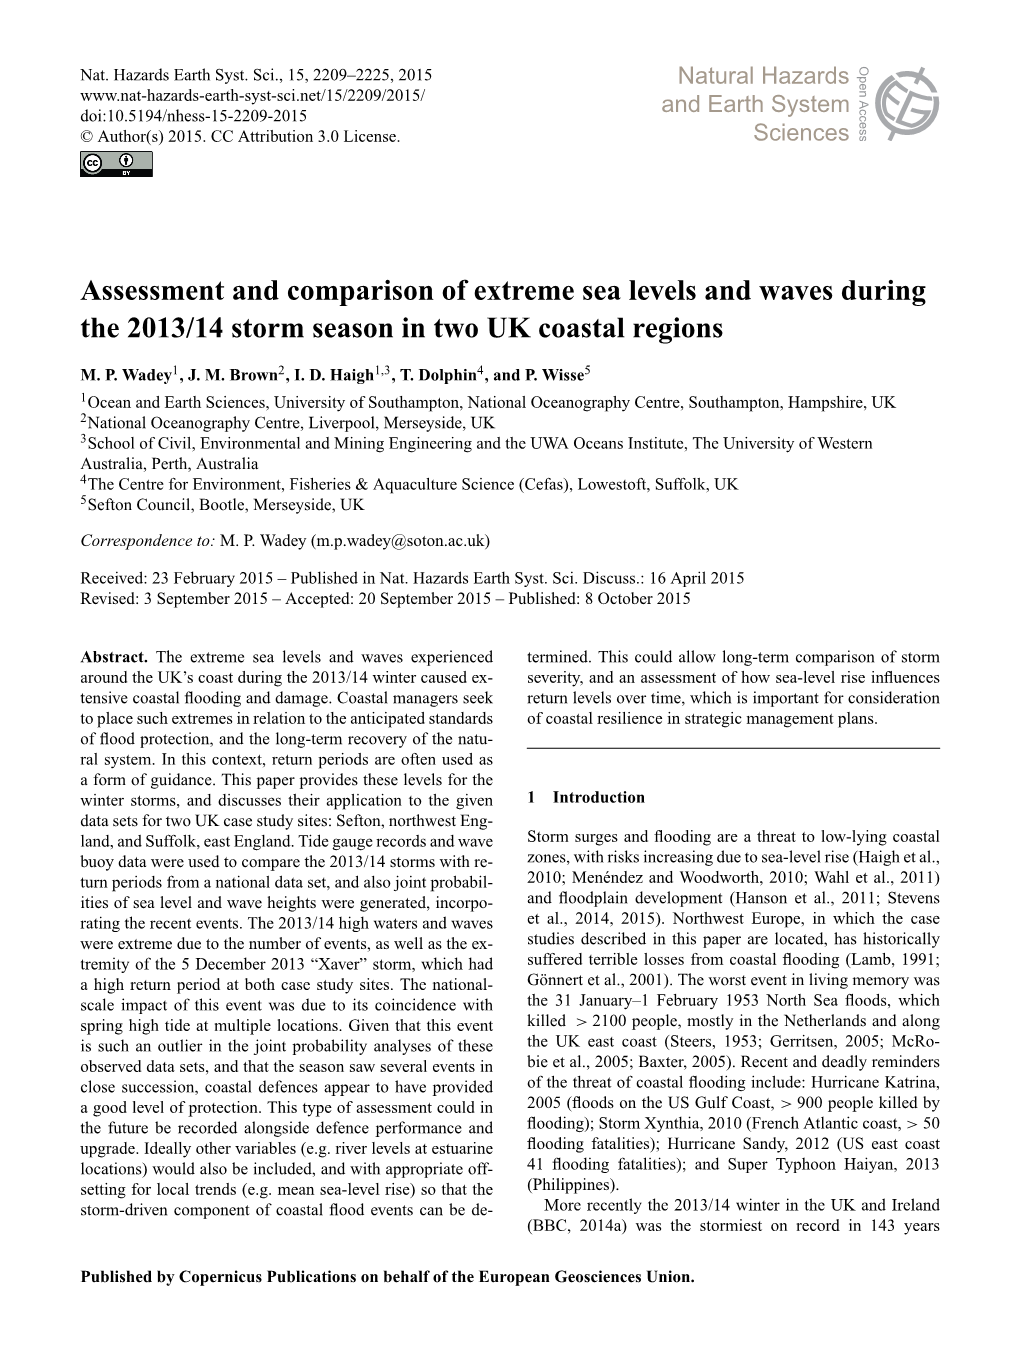 Assessment and Comparison of Extreme Sea Levels and Waves During the 2013/14 Storm Season in Two UK Coastal Regions